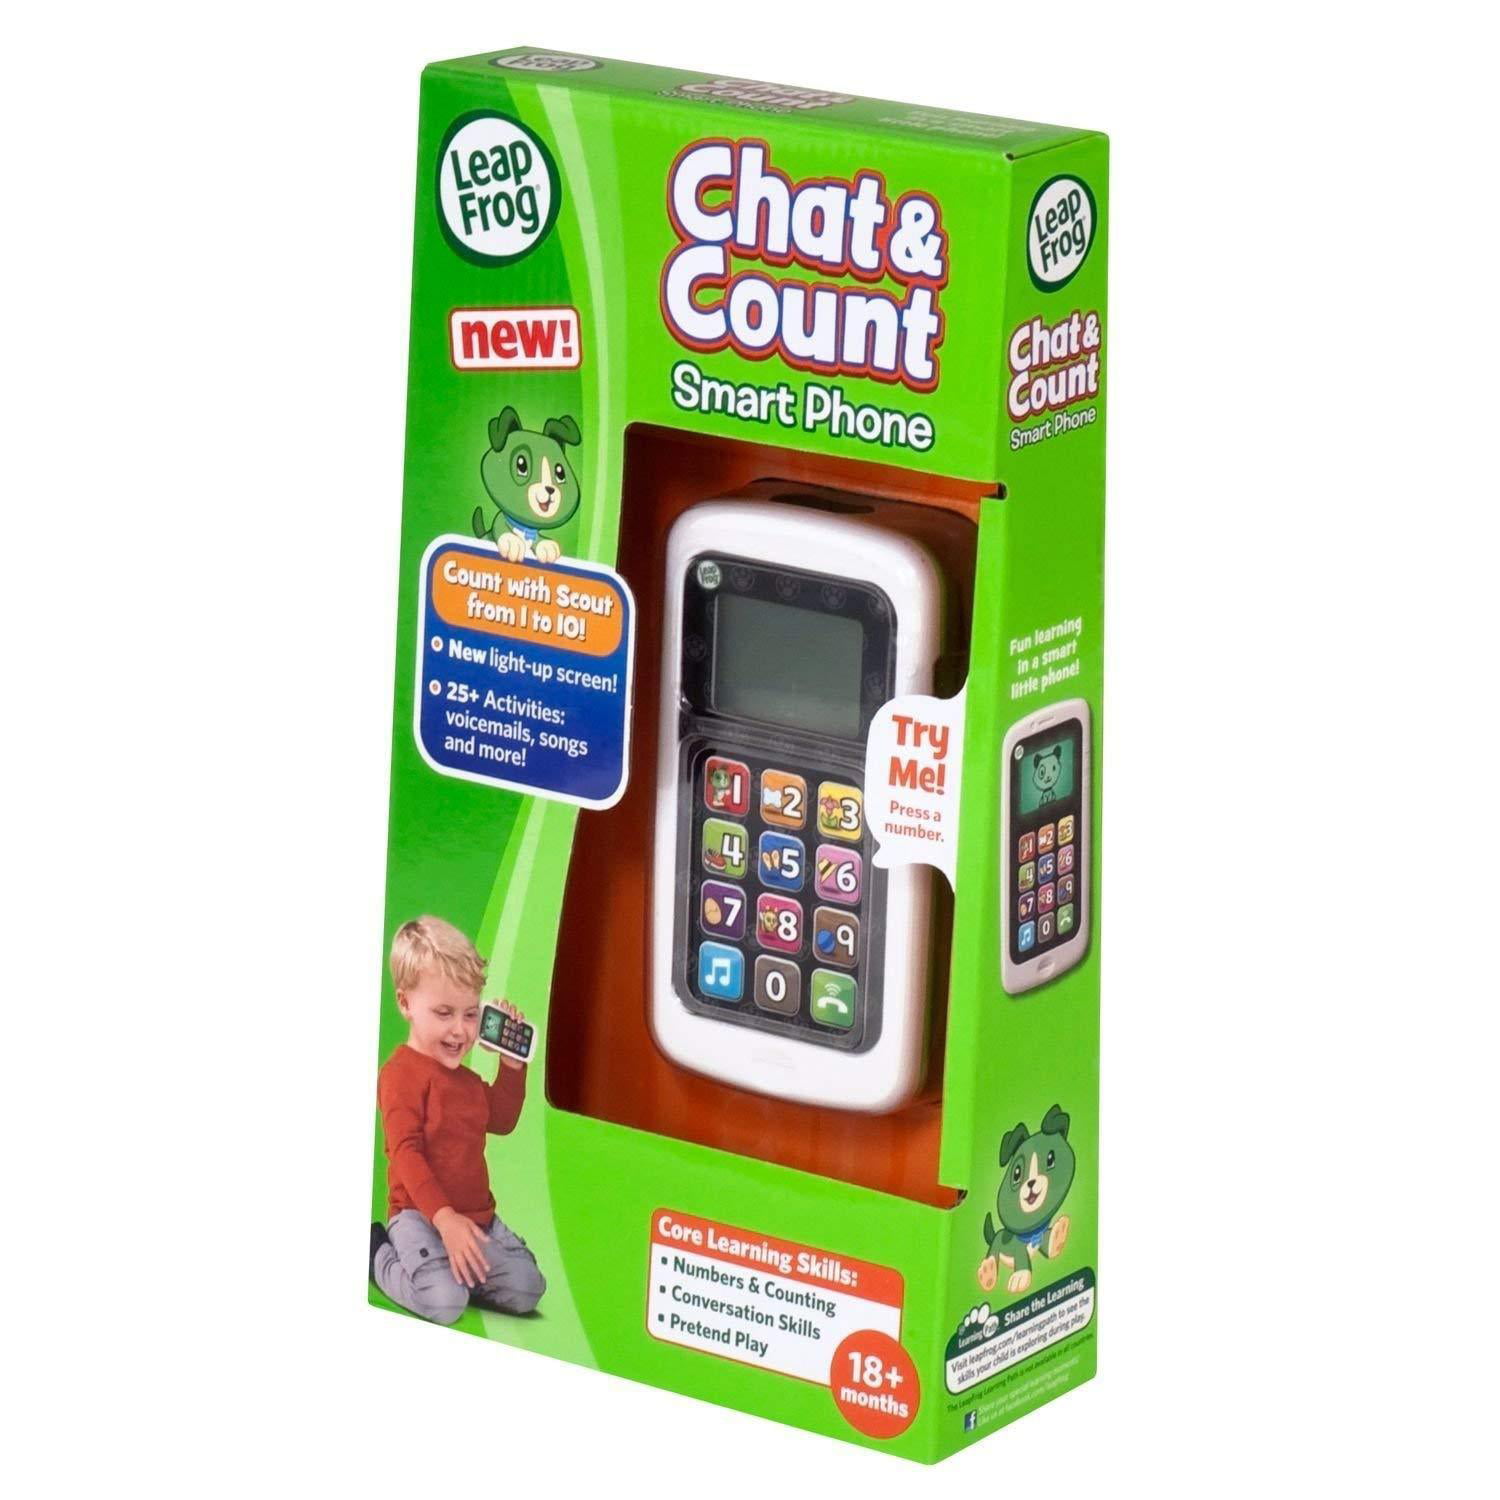 80-19145E for sale online LeapFrog Scout Chat and Count Cell Phone